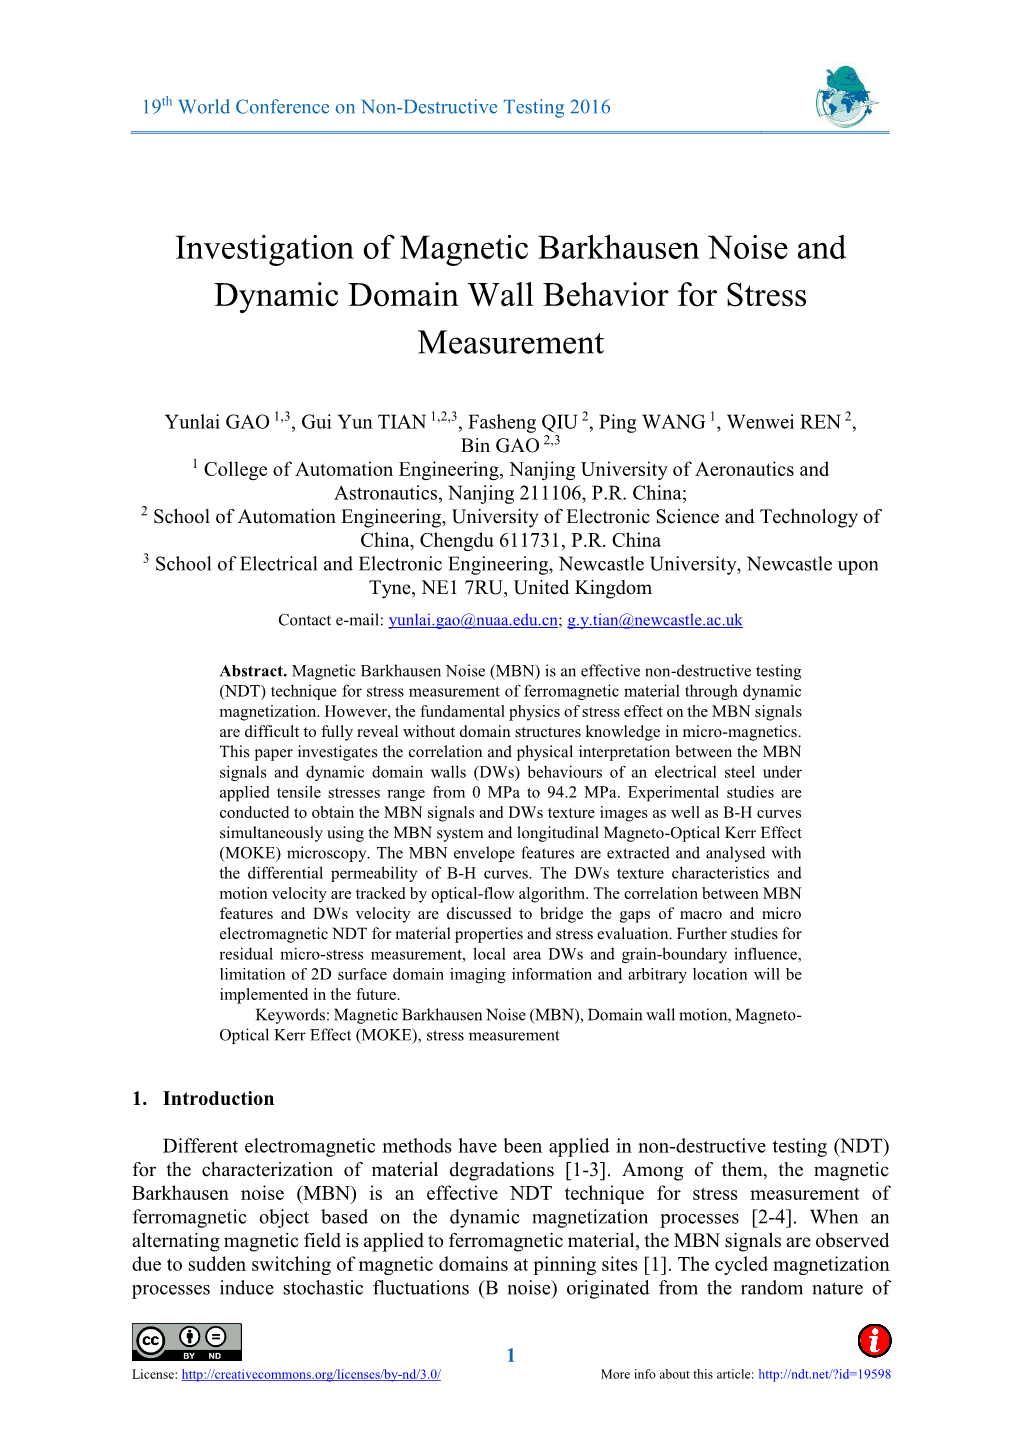 Investigation of Magnetic Barkhausen Noise and Dynamic Domain Wall Behavior for Stress Measurement